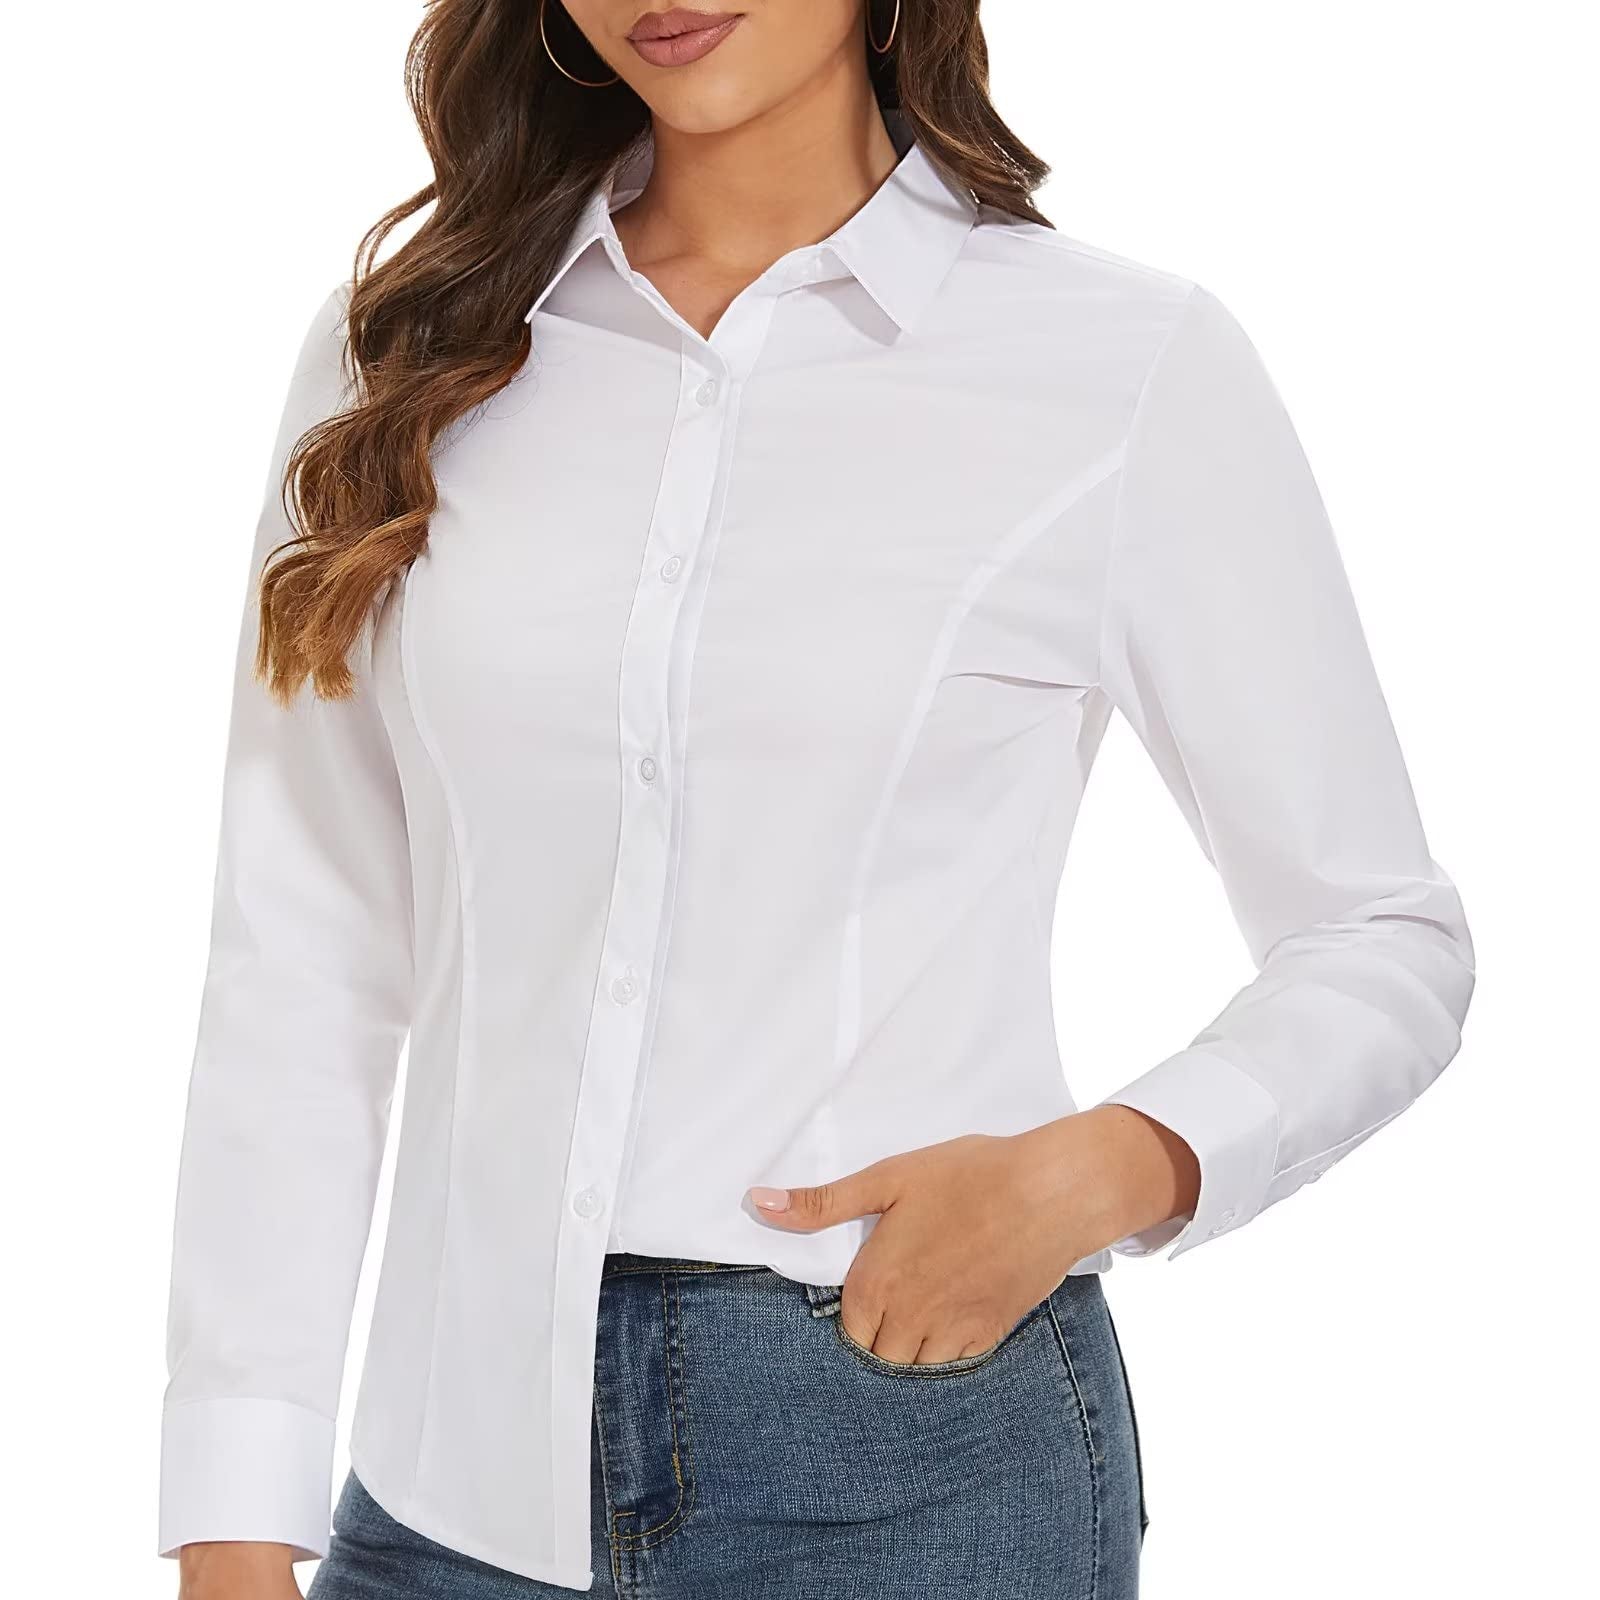 Womens Basic Button Down Shirt Slim Fit Casual Blouse Formal Long-Sleeve Wrinkle-Free Shirt